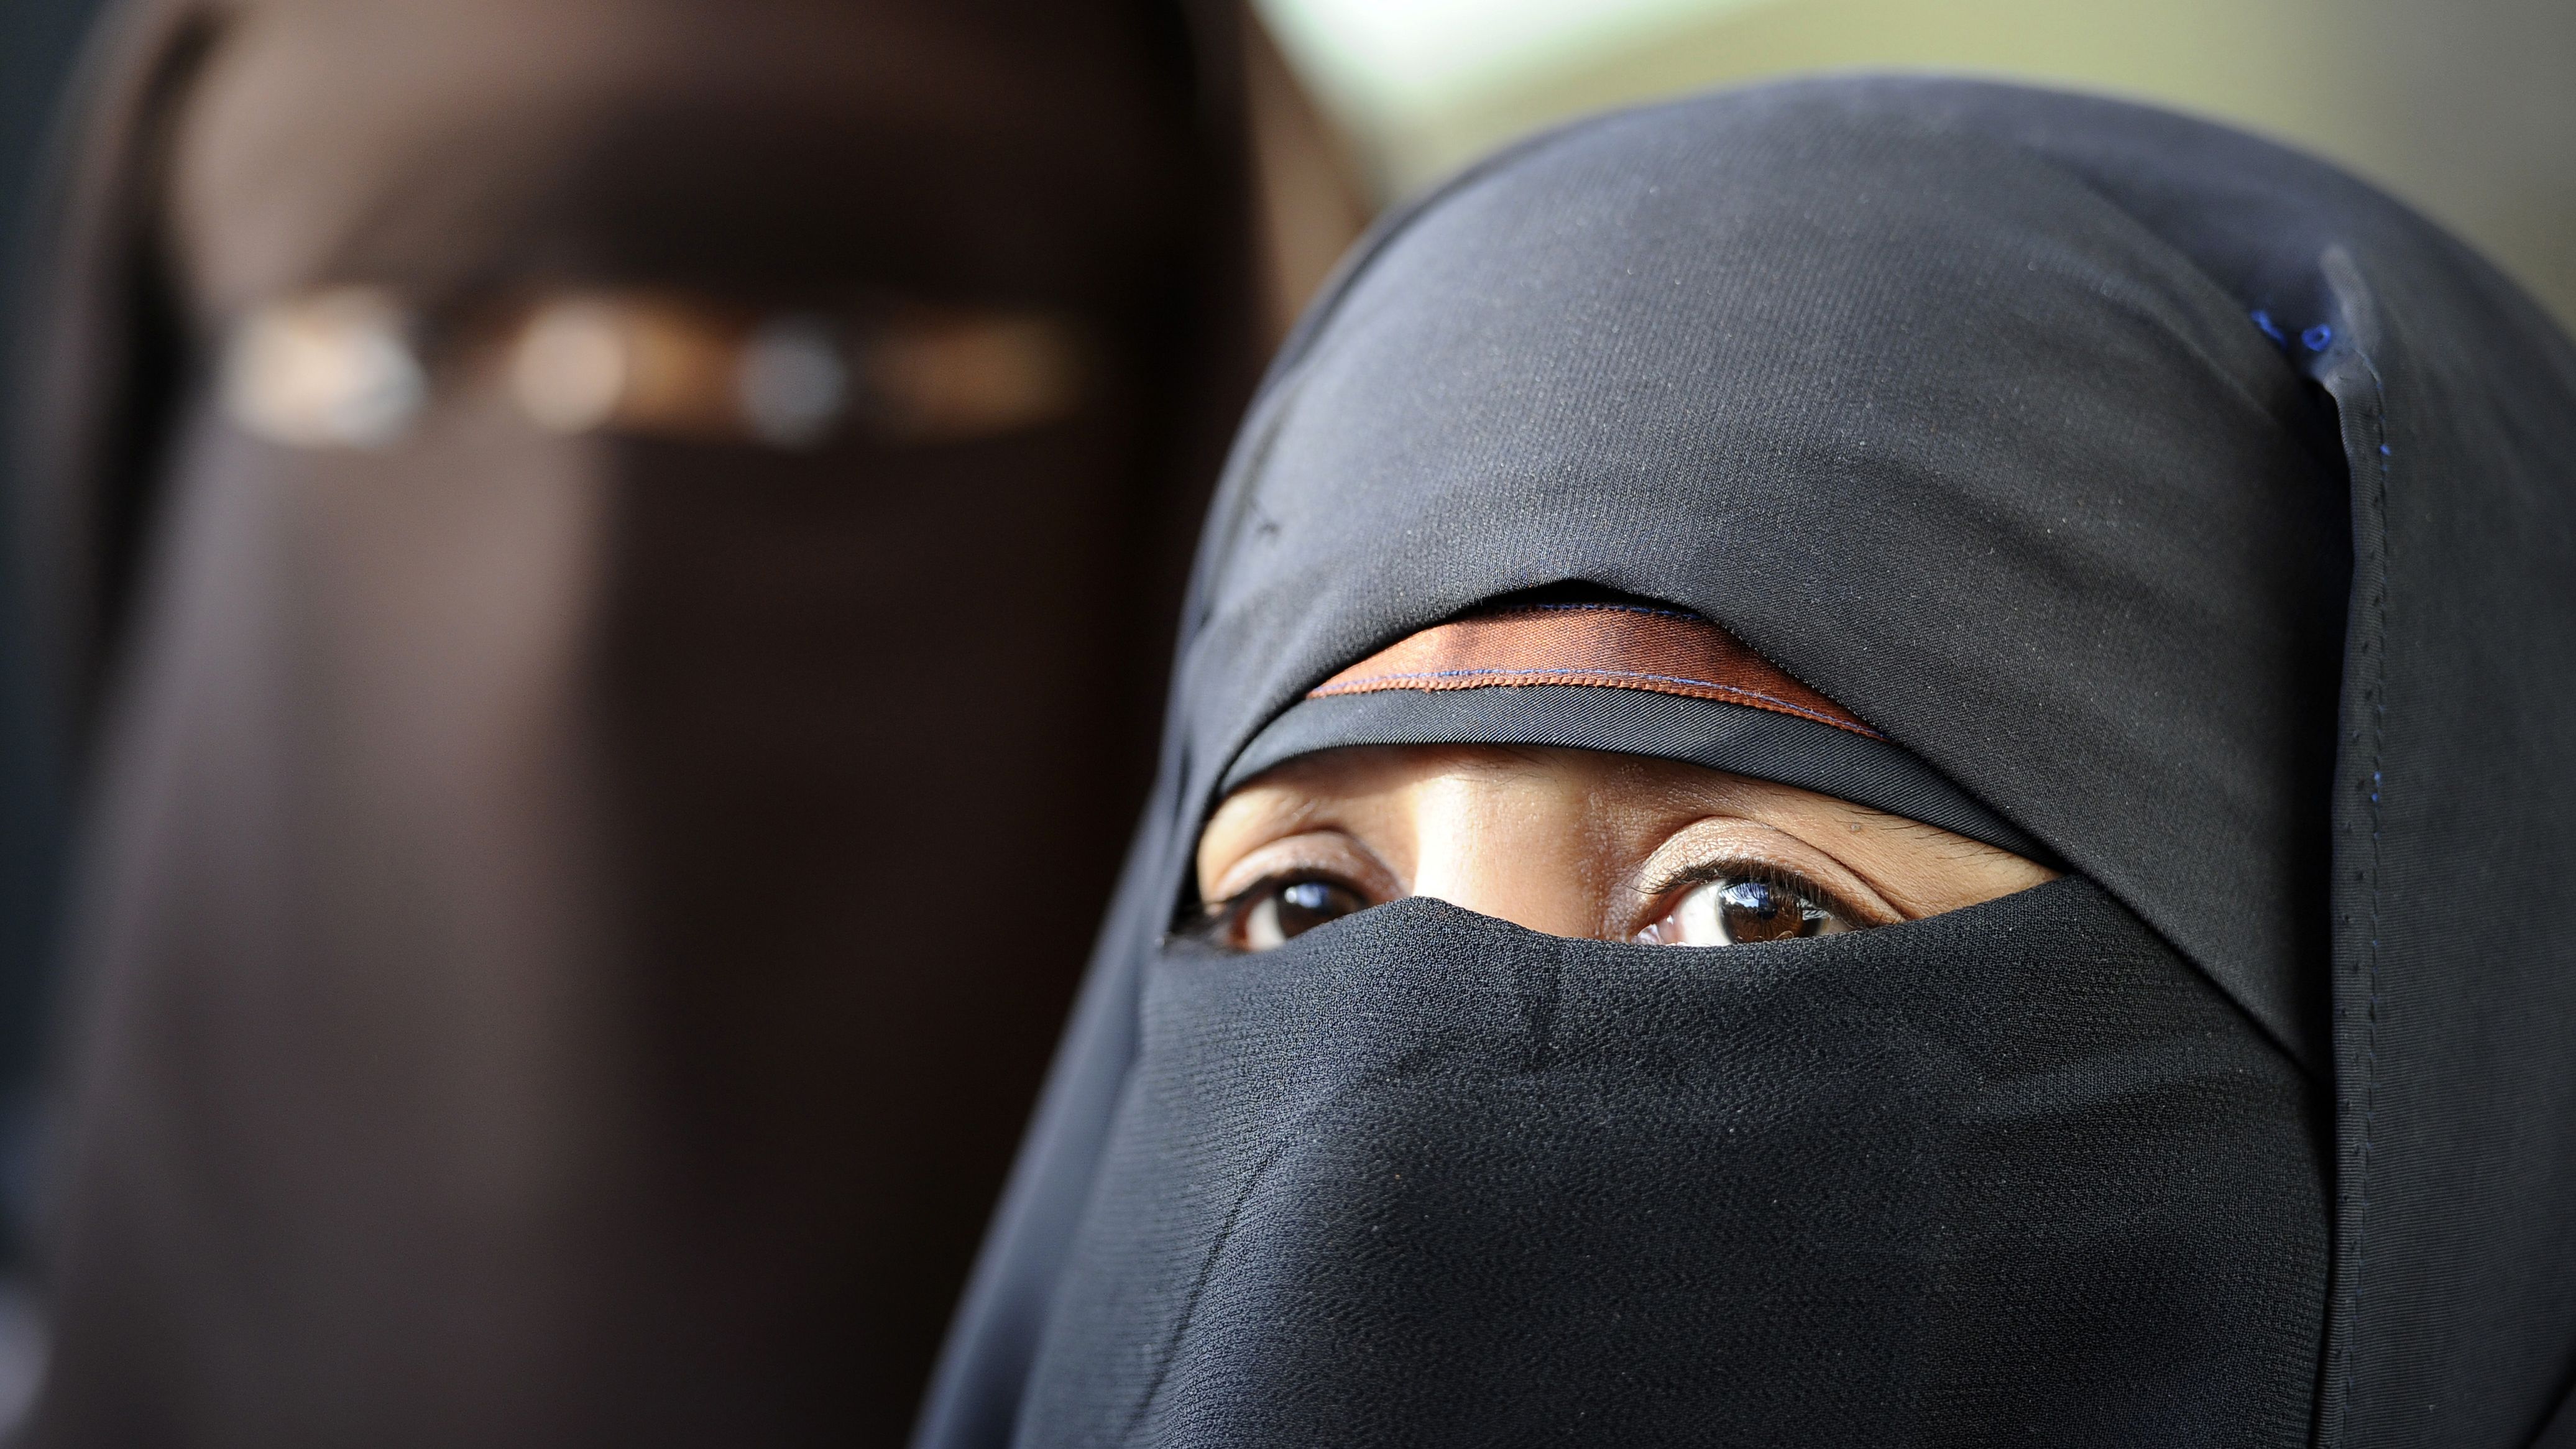 Five things you didn't know about religious veils | CNN